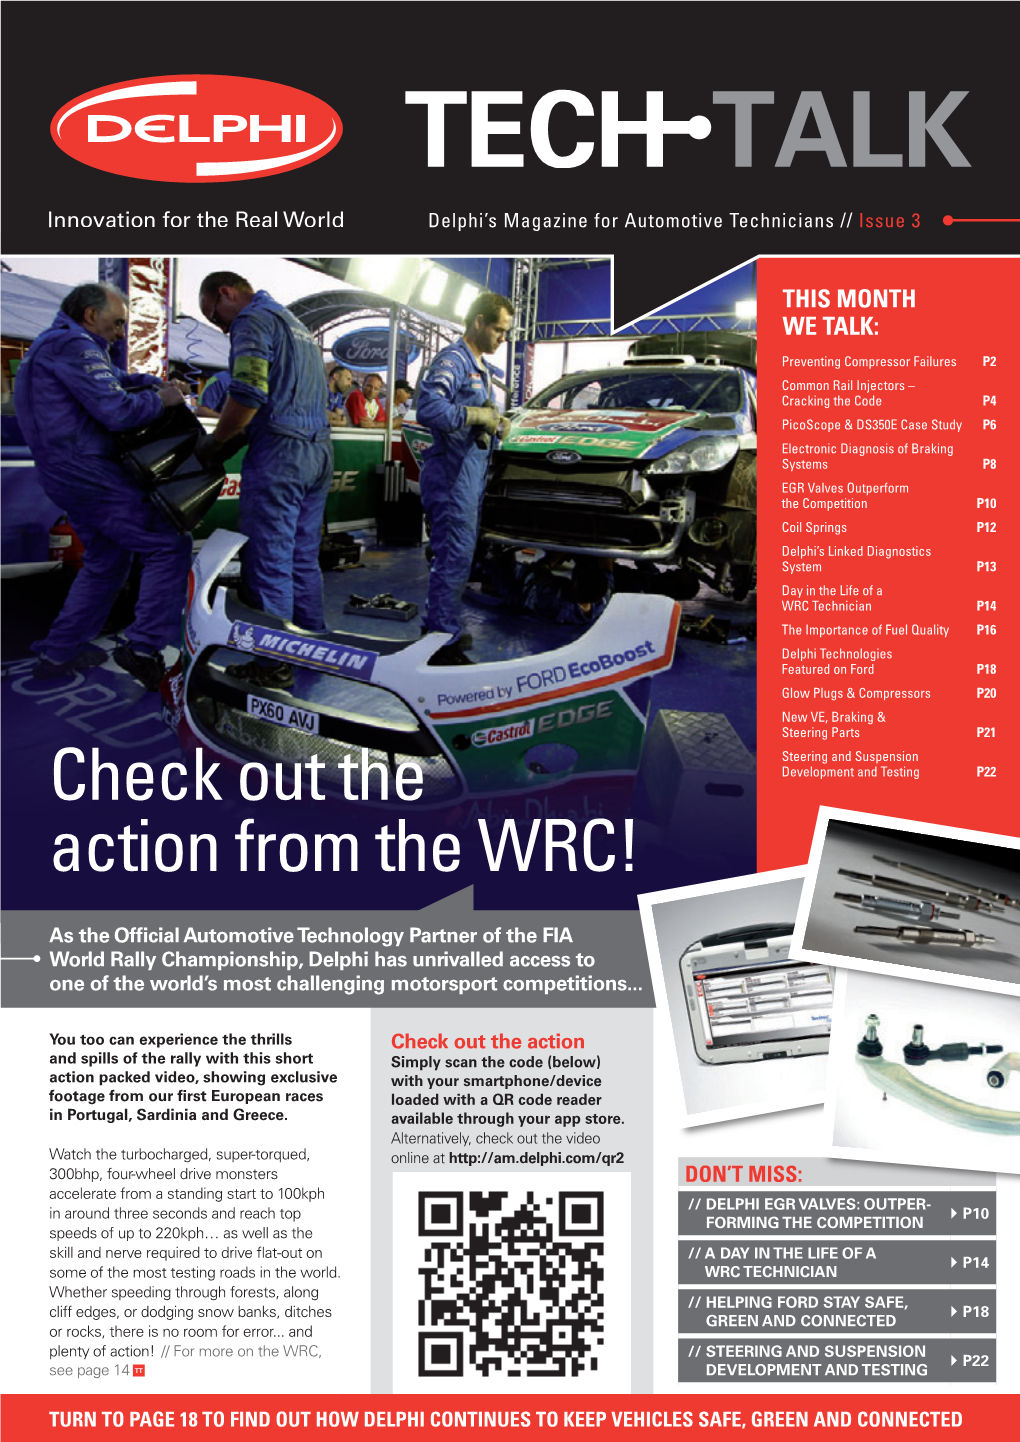 Check out the Action from the WRC!